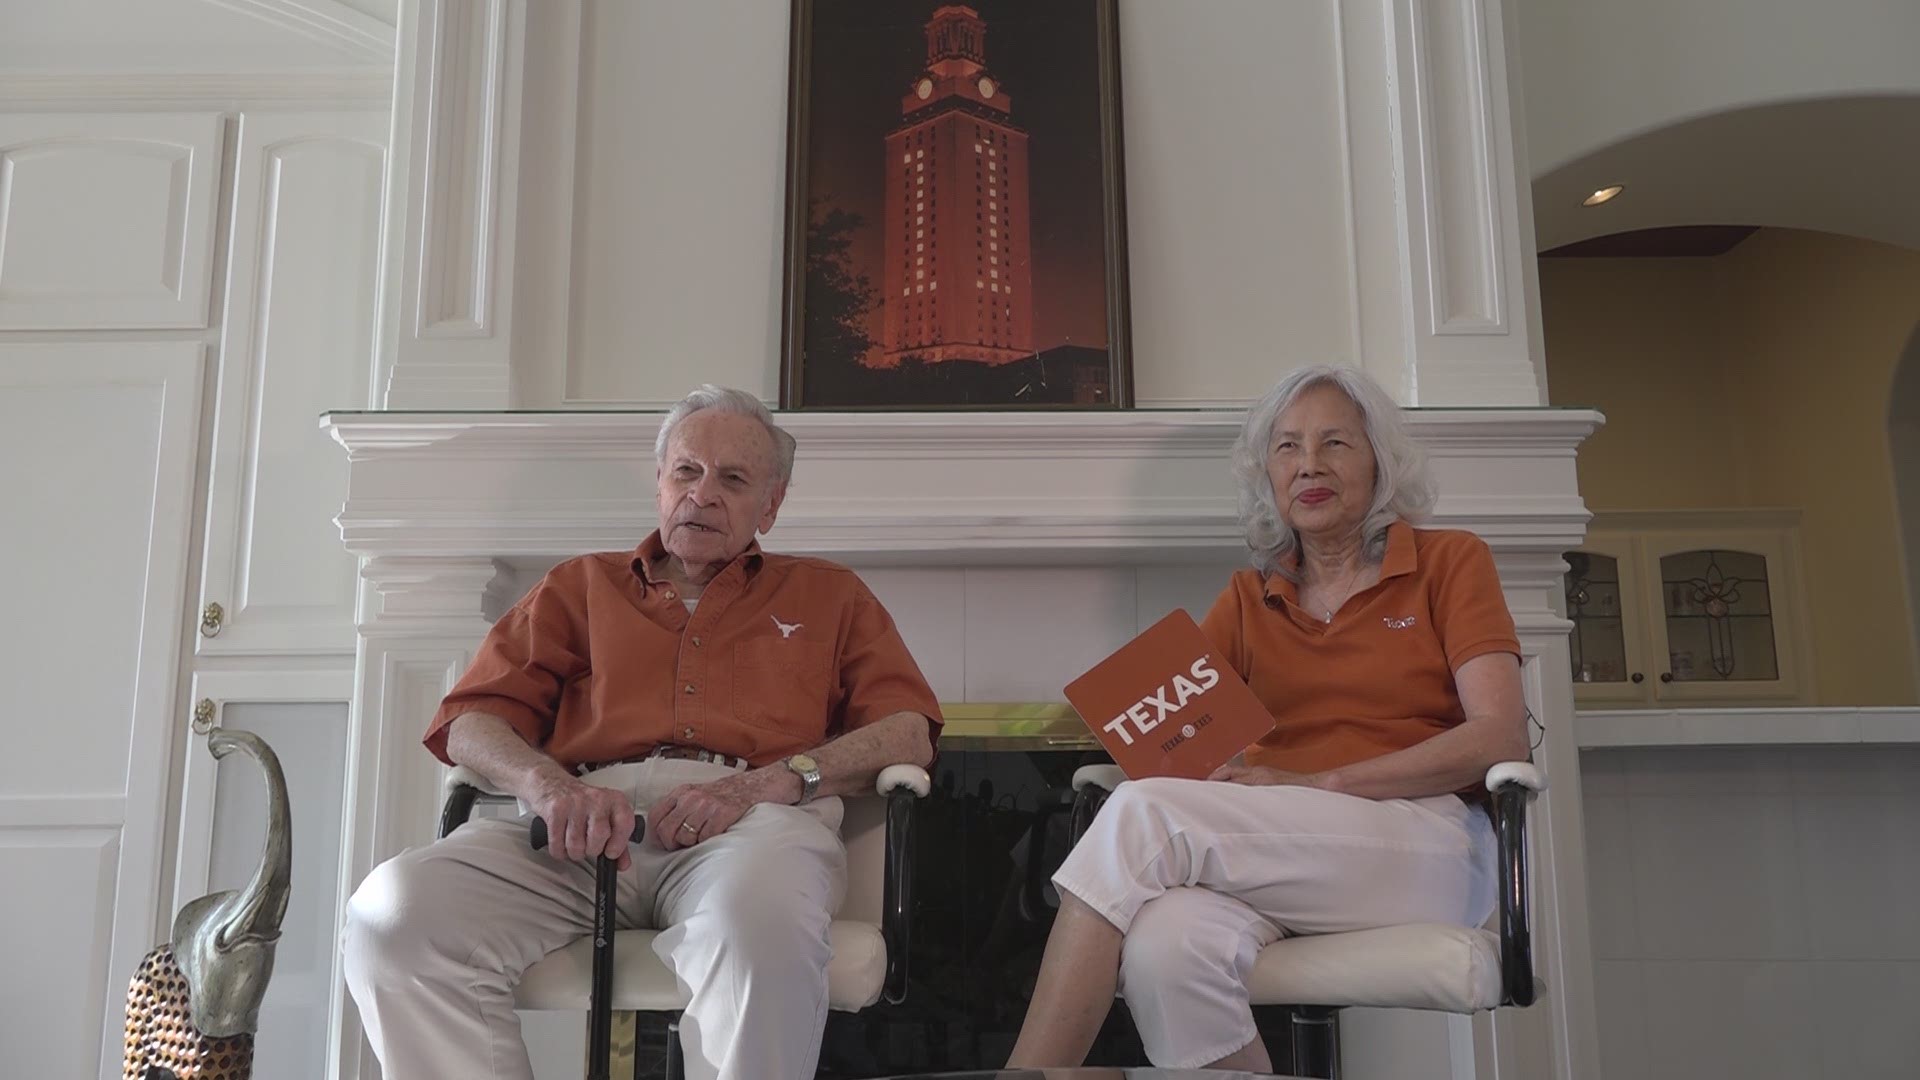 They've been going to the Texas-Oklahoma showdown for more than 20 years.